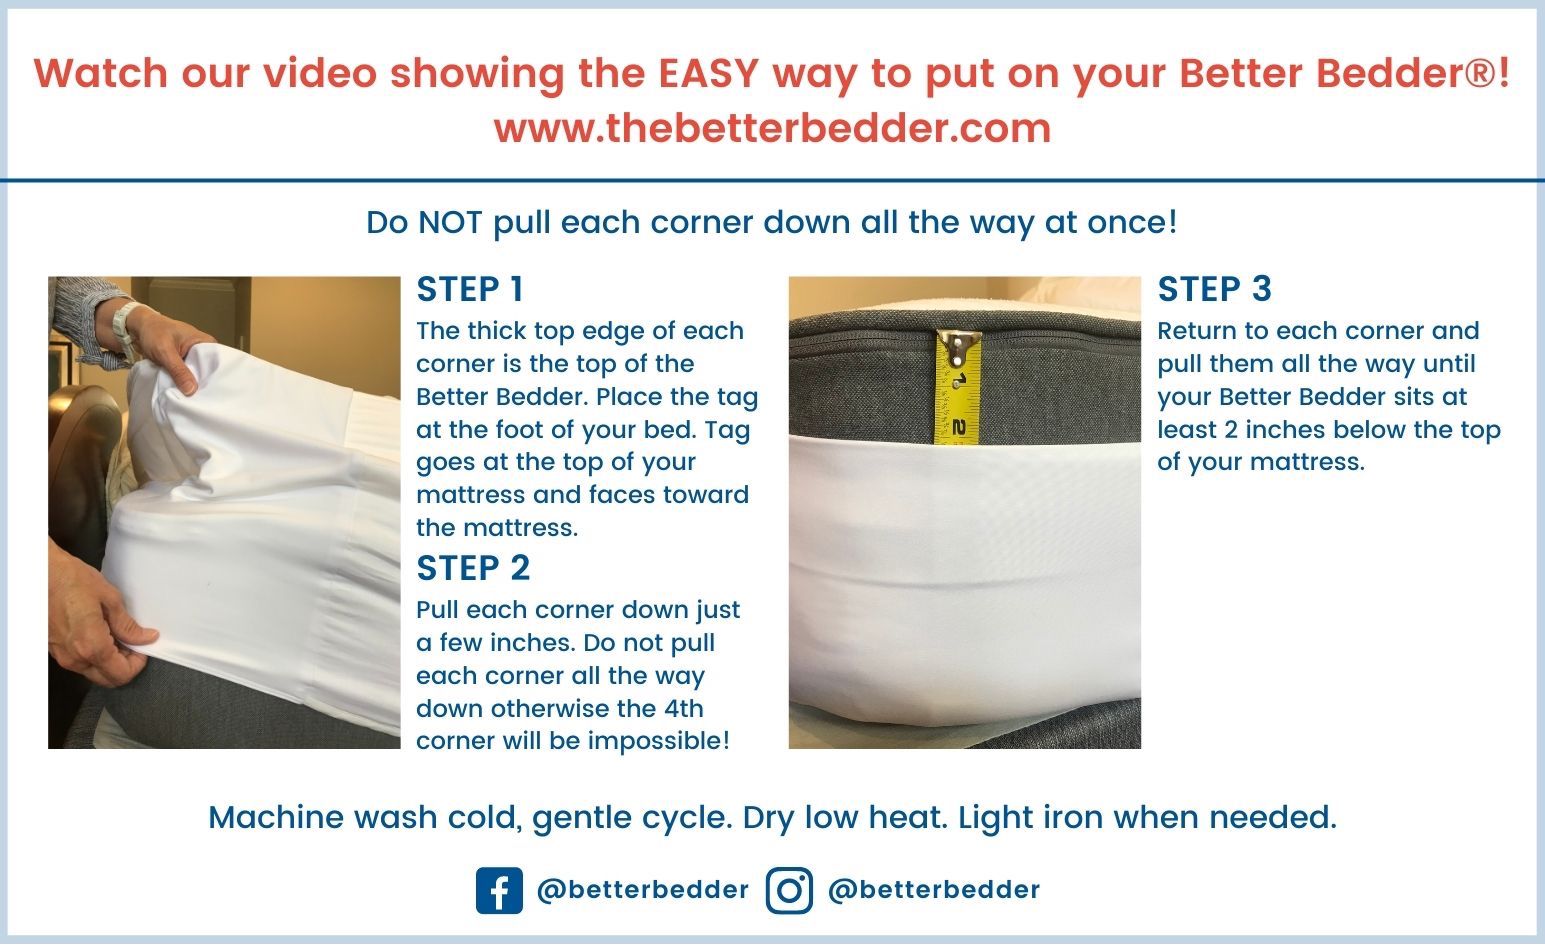 3. Video: How do I put on the Better Bedder®?